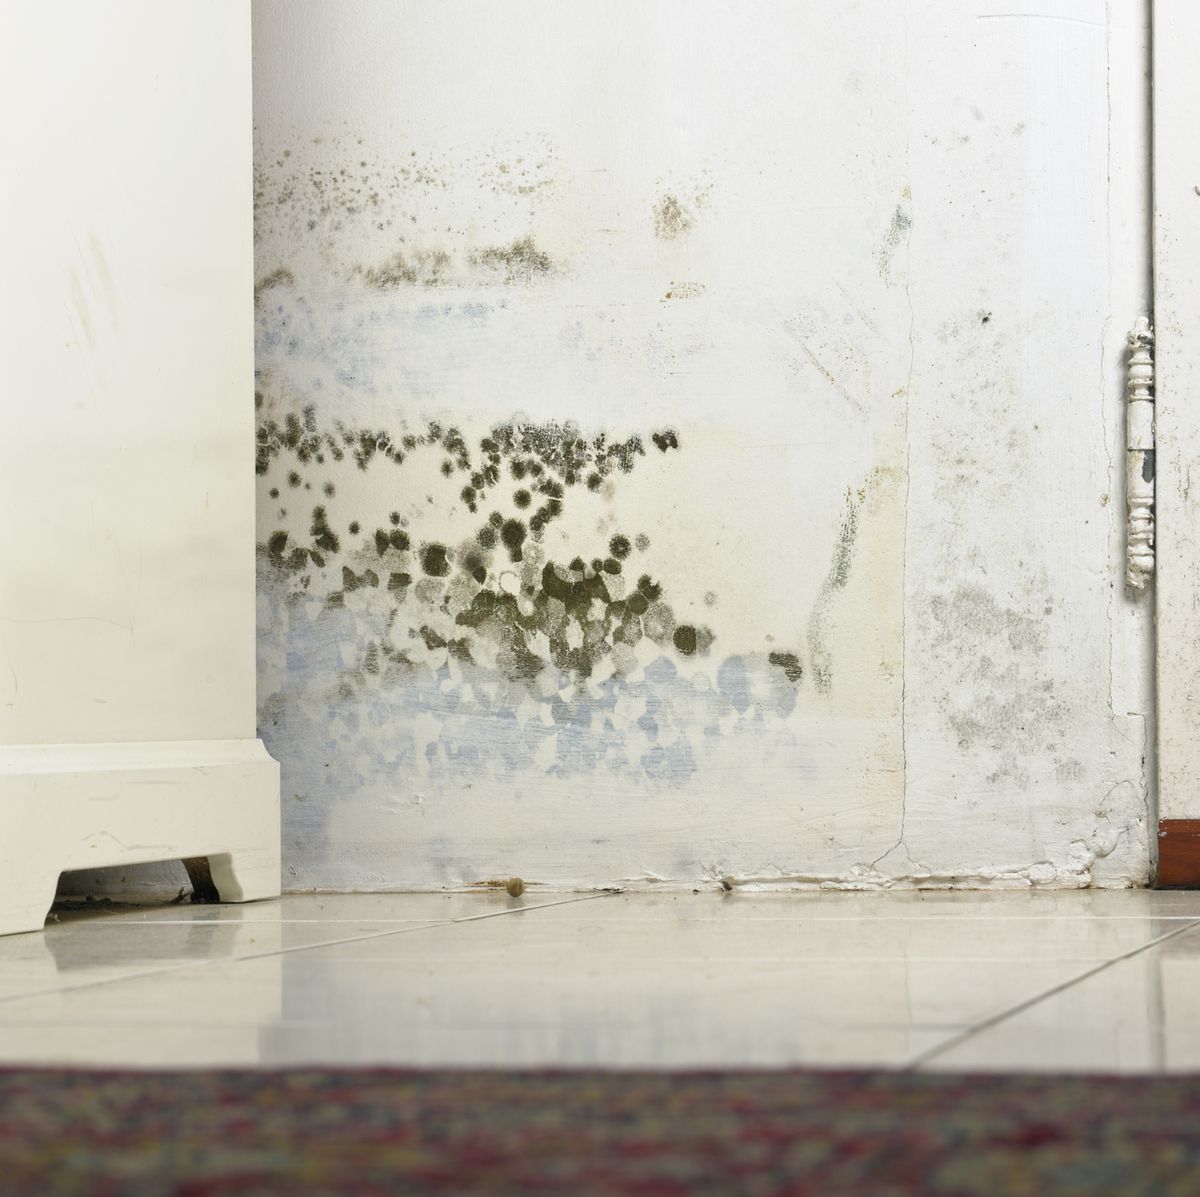 How to Get Rid of Black Mold - Removing Black Mold From Shower, Ceiling &  Walls